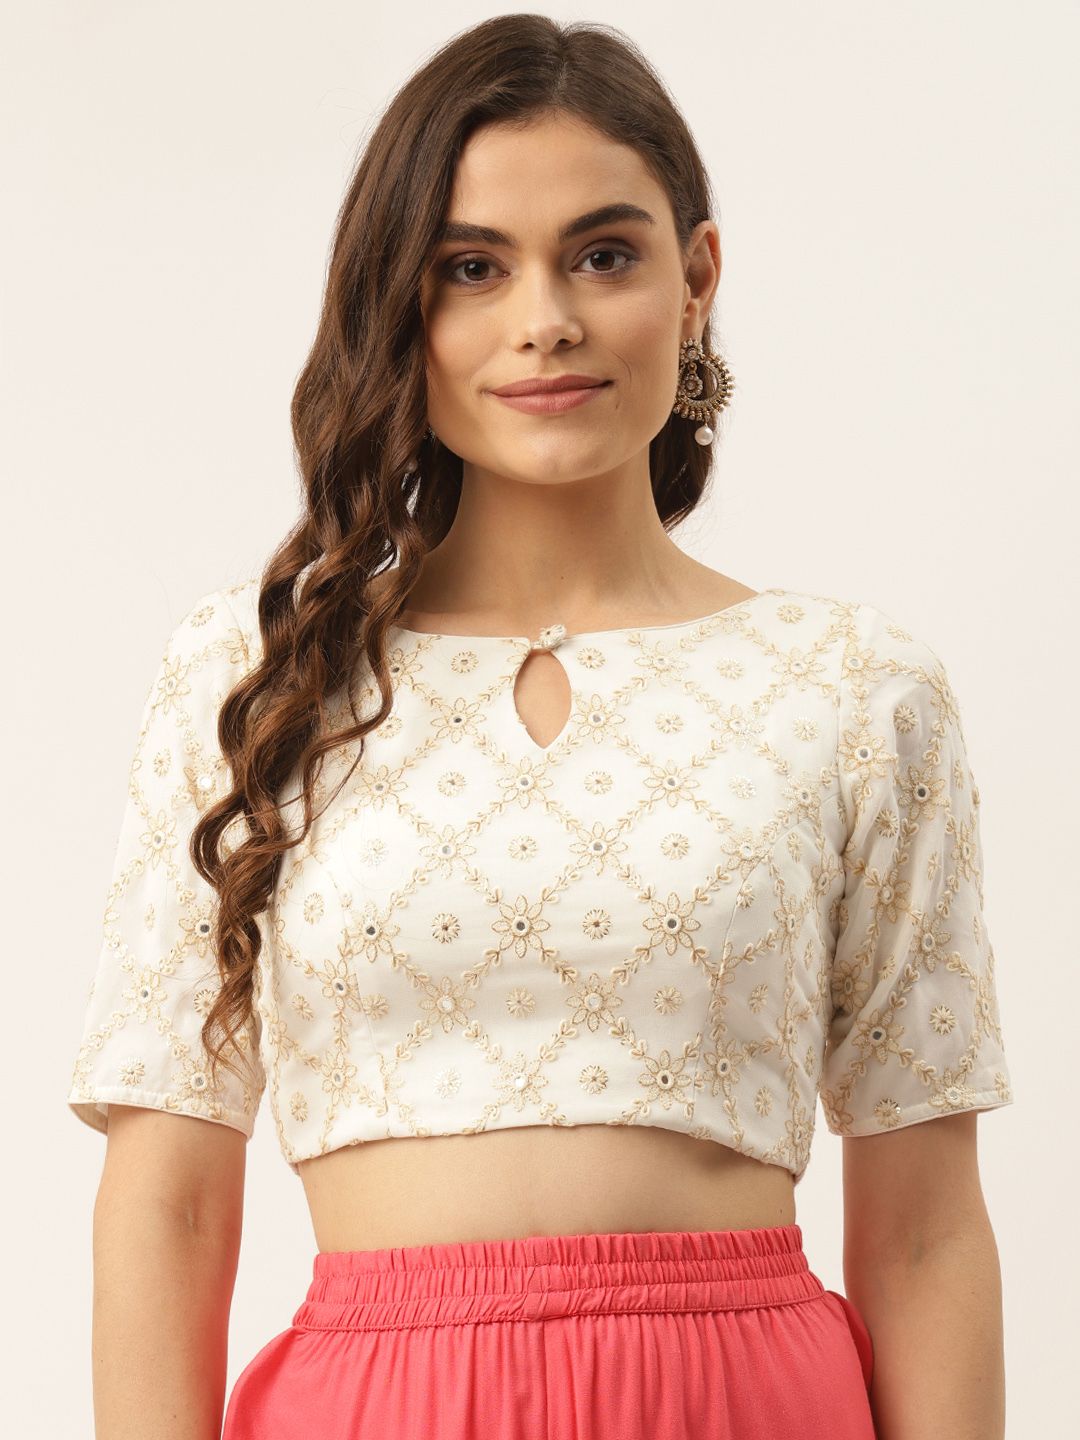 NDS Niharikaa Designer Studio Women White & Golden Embroidered Padded Blouse Price in India